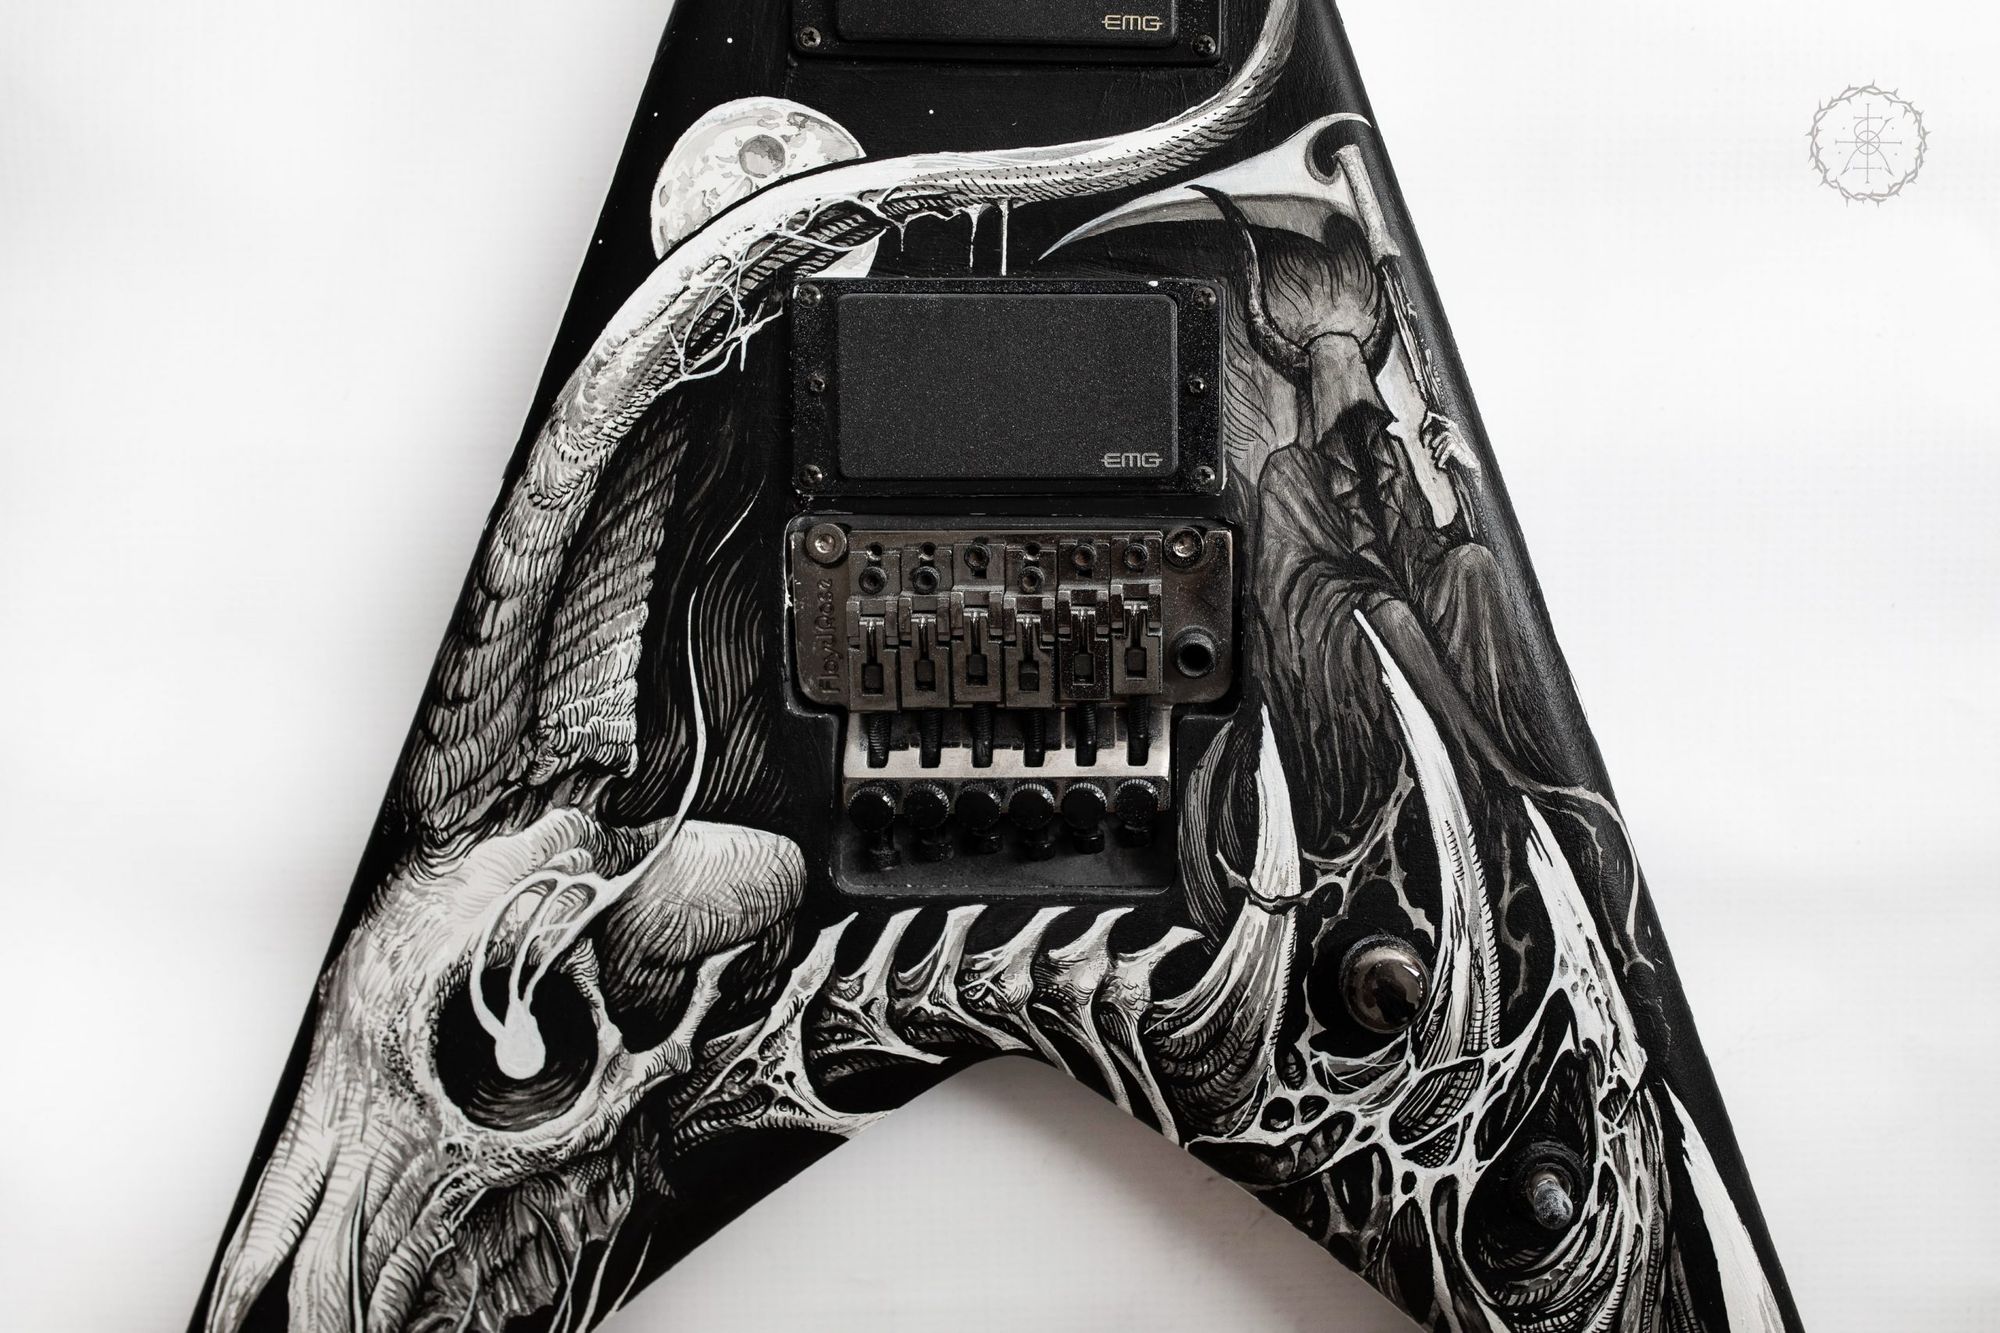 Miki Vialetto's guitar collection expands with a Hungarian tattoo artist's piece | Grindesign